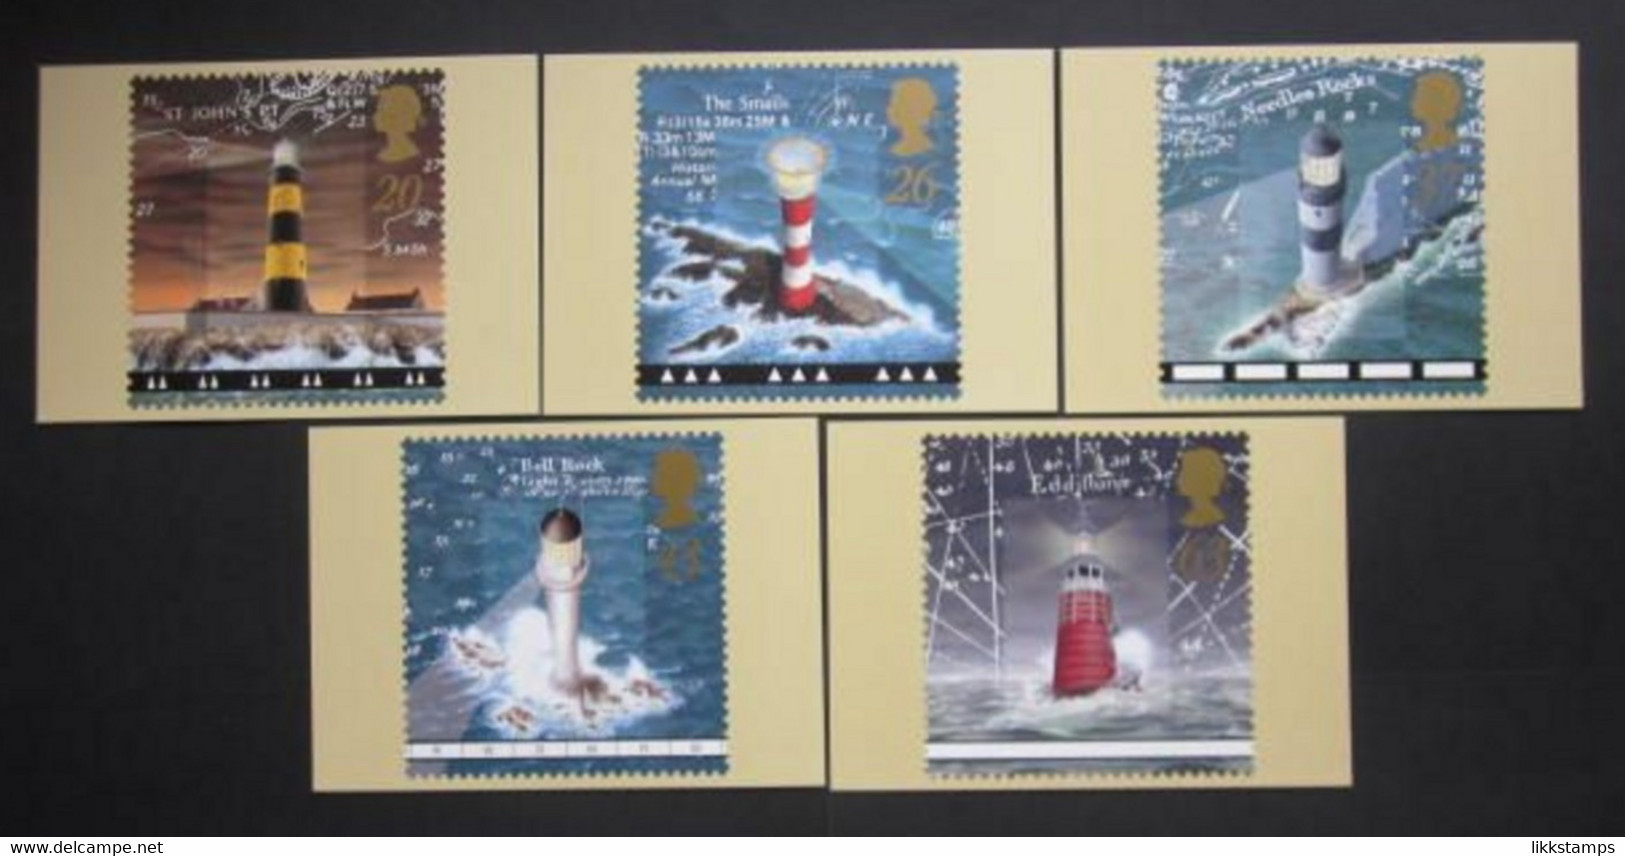 1998 LIGHTHOUSES P.H.Q. CARDS UNUSED, ISSUE No. 196 (B) #00955 - Carte PHQ